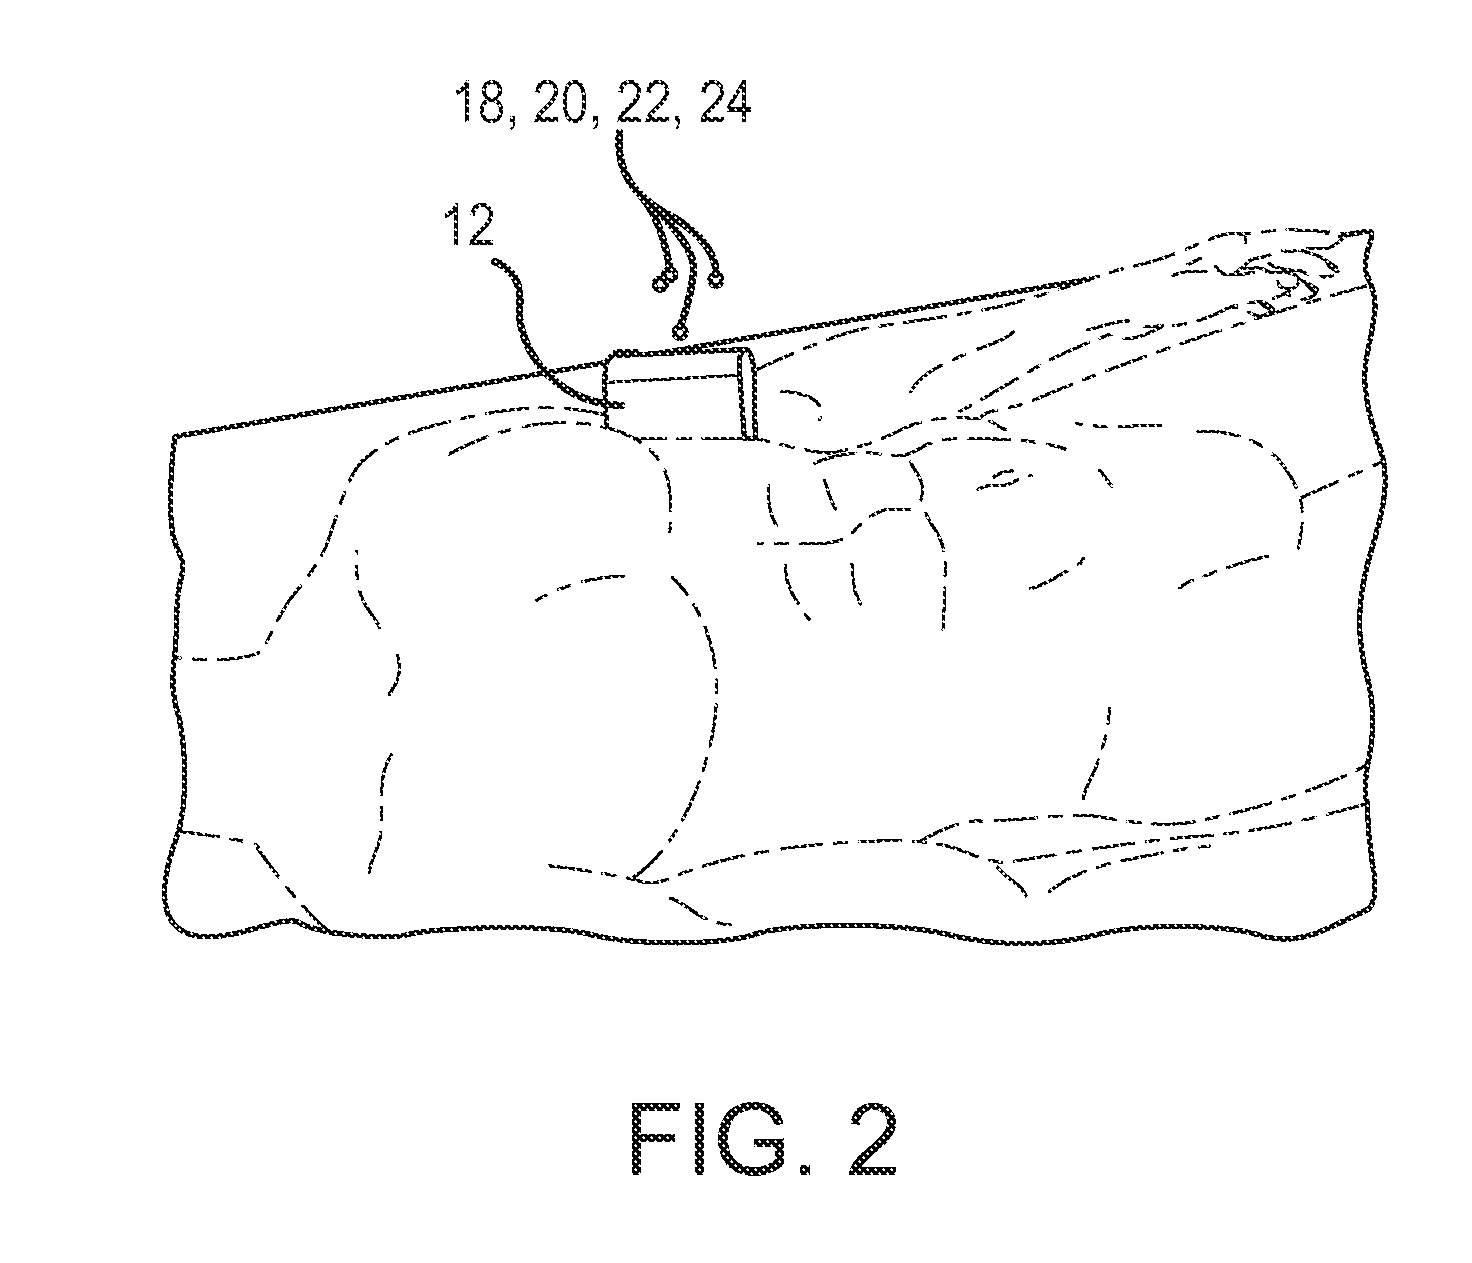 Method and apparatus for collection of cardiac geometry based on optical or magnetic tracking